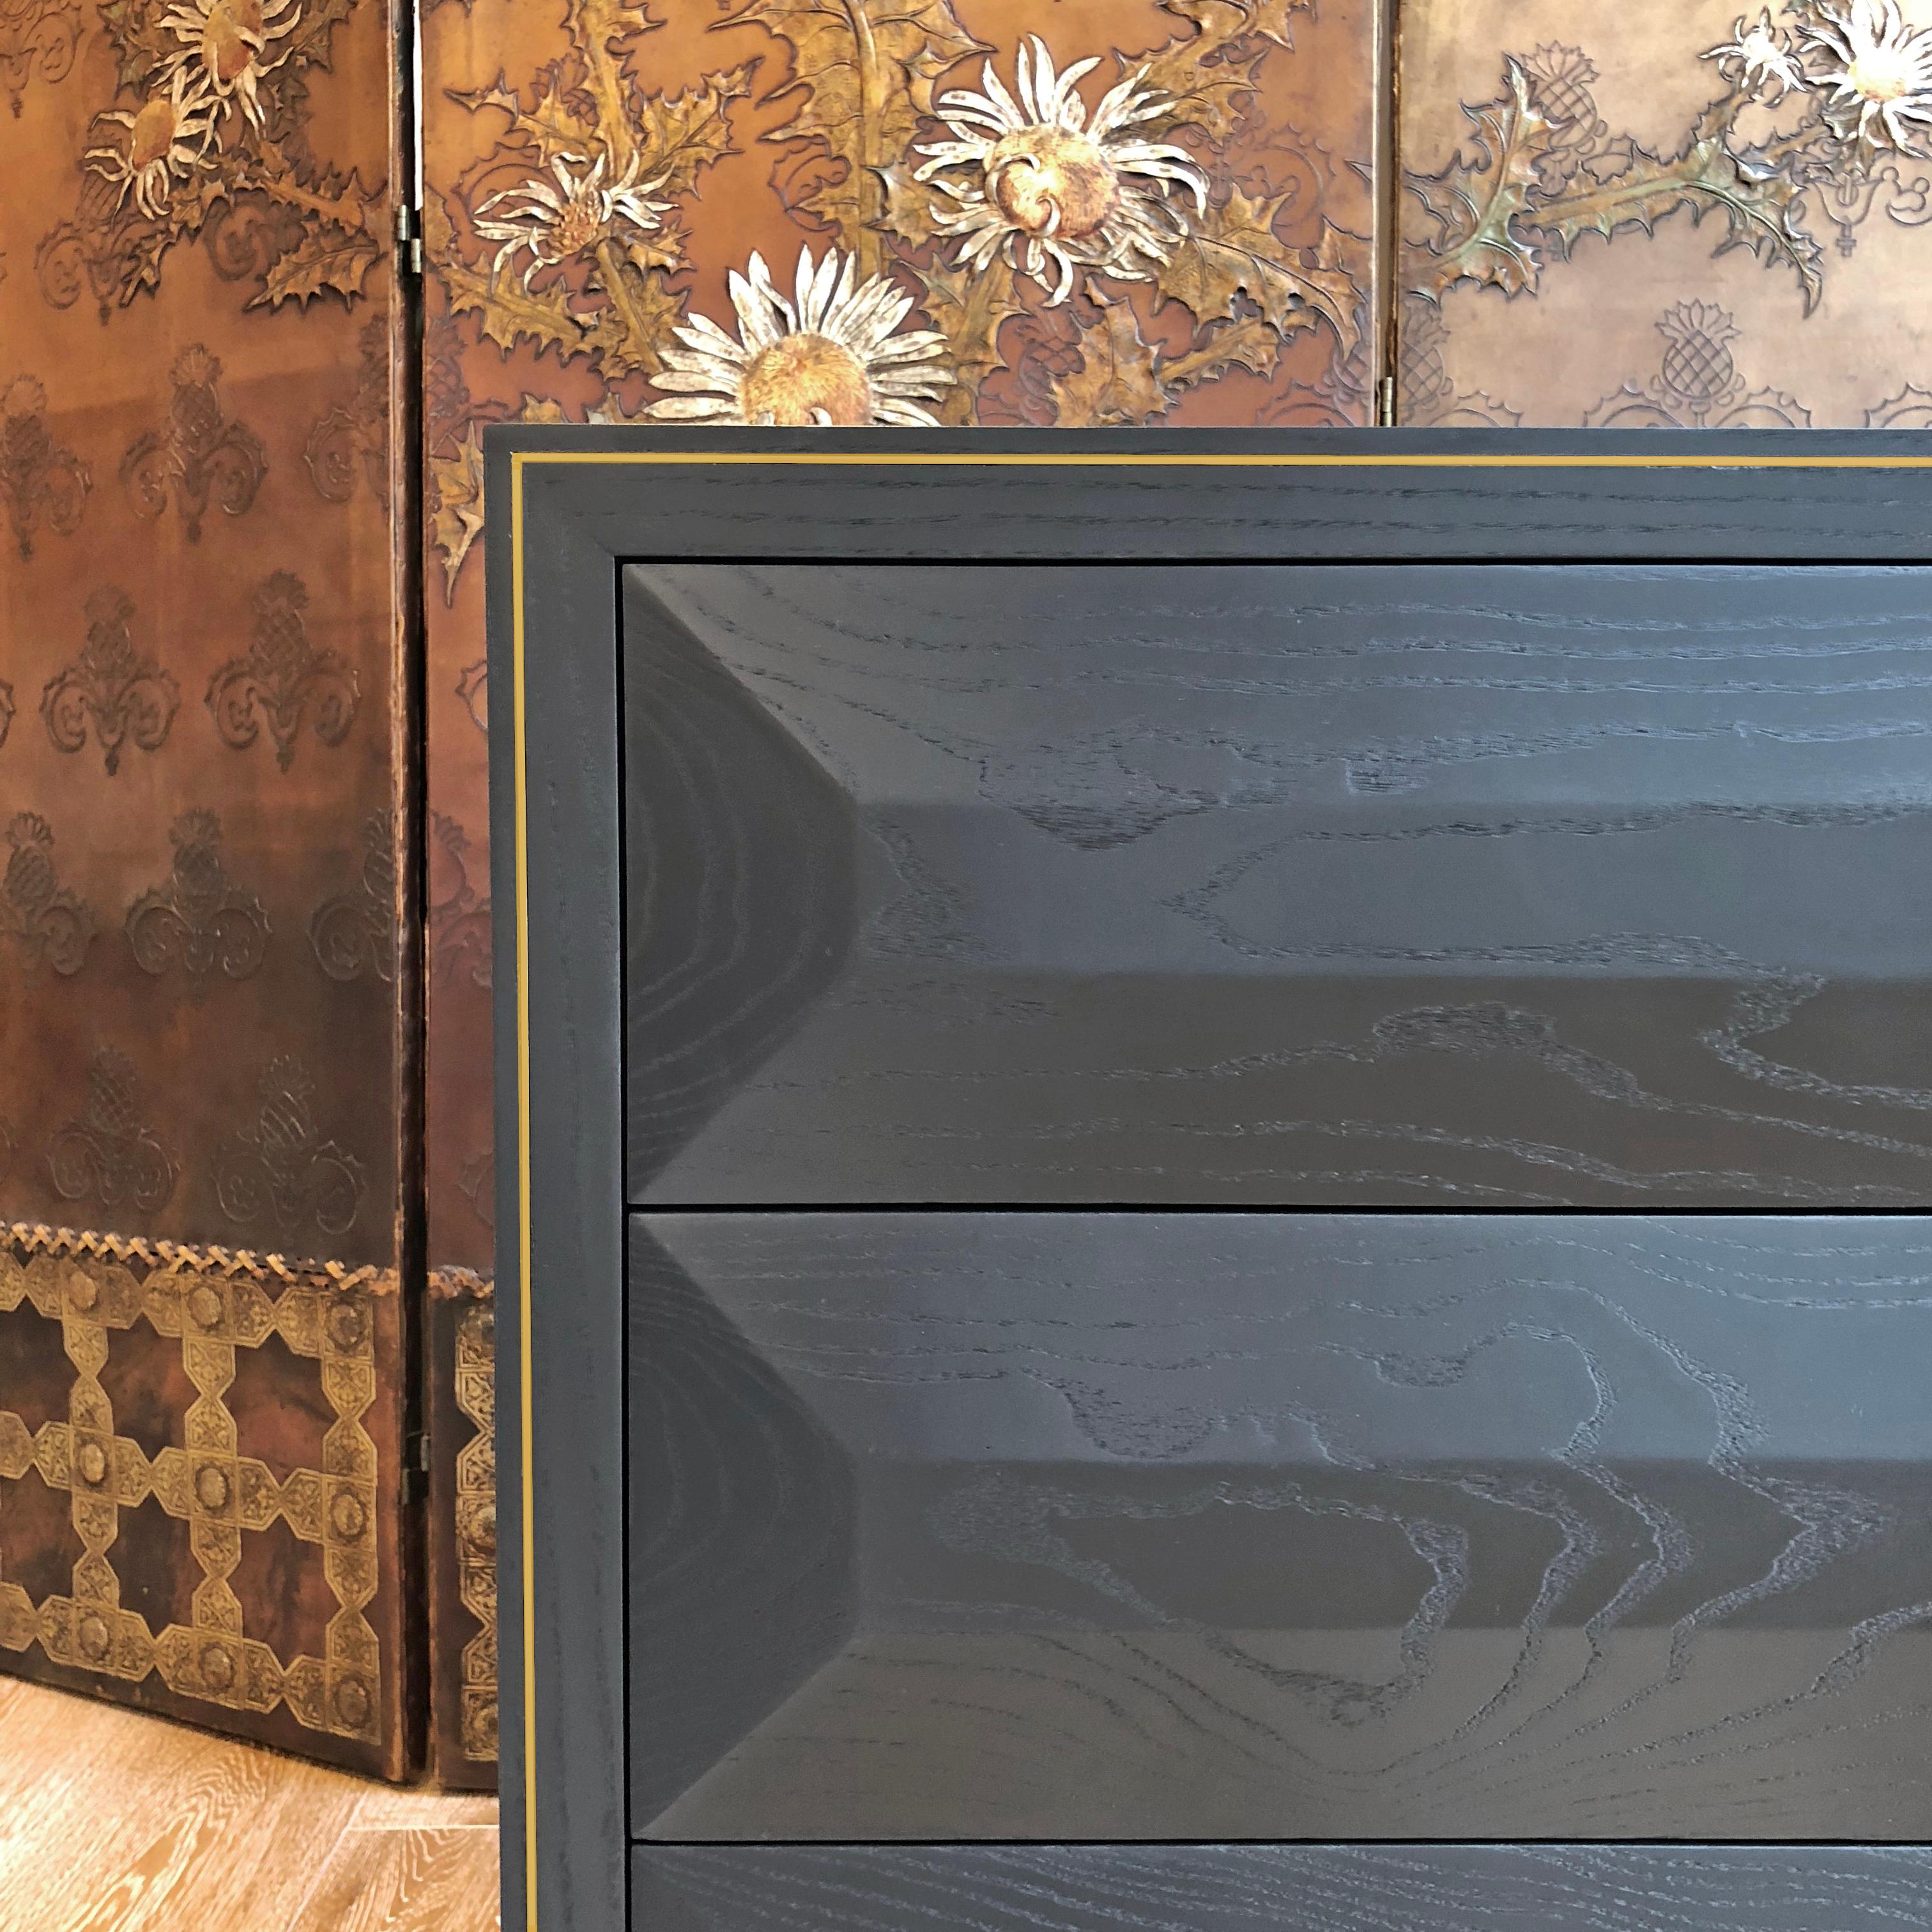 Black (RAL 9004) satin lacquered chest of drawers with brass plinth, push-to-open wood lined drawers and brass trim detailing.

Measures: 80 W x 45 D x 65 H cm.